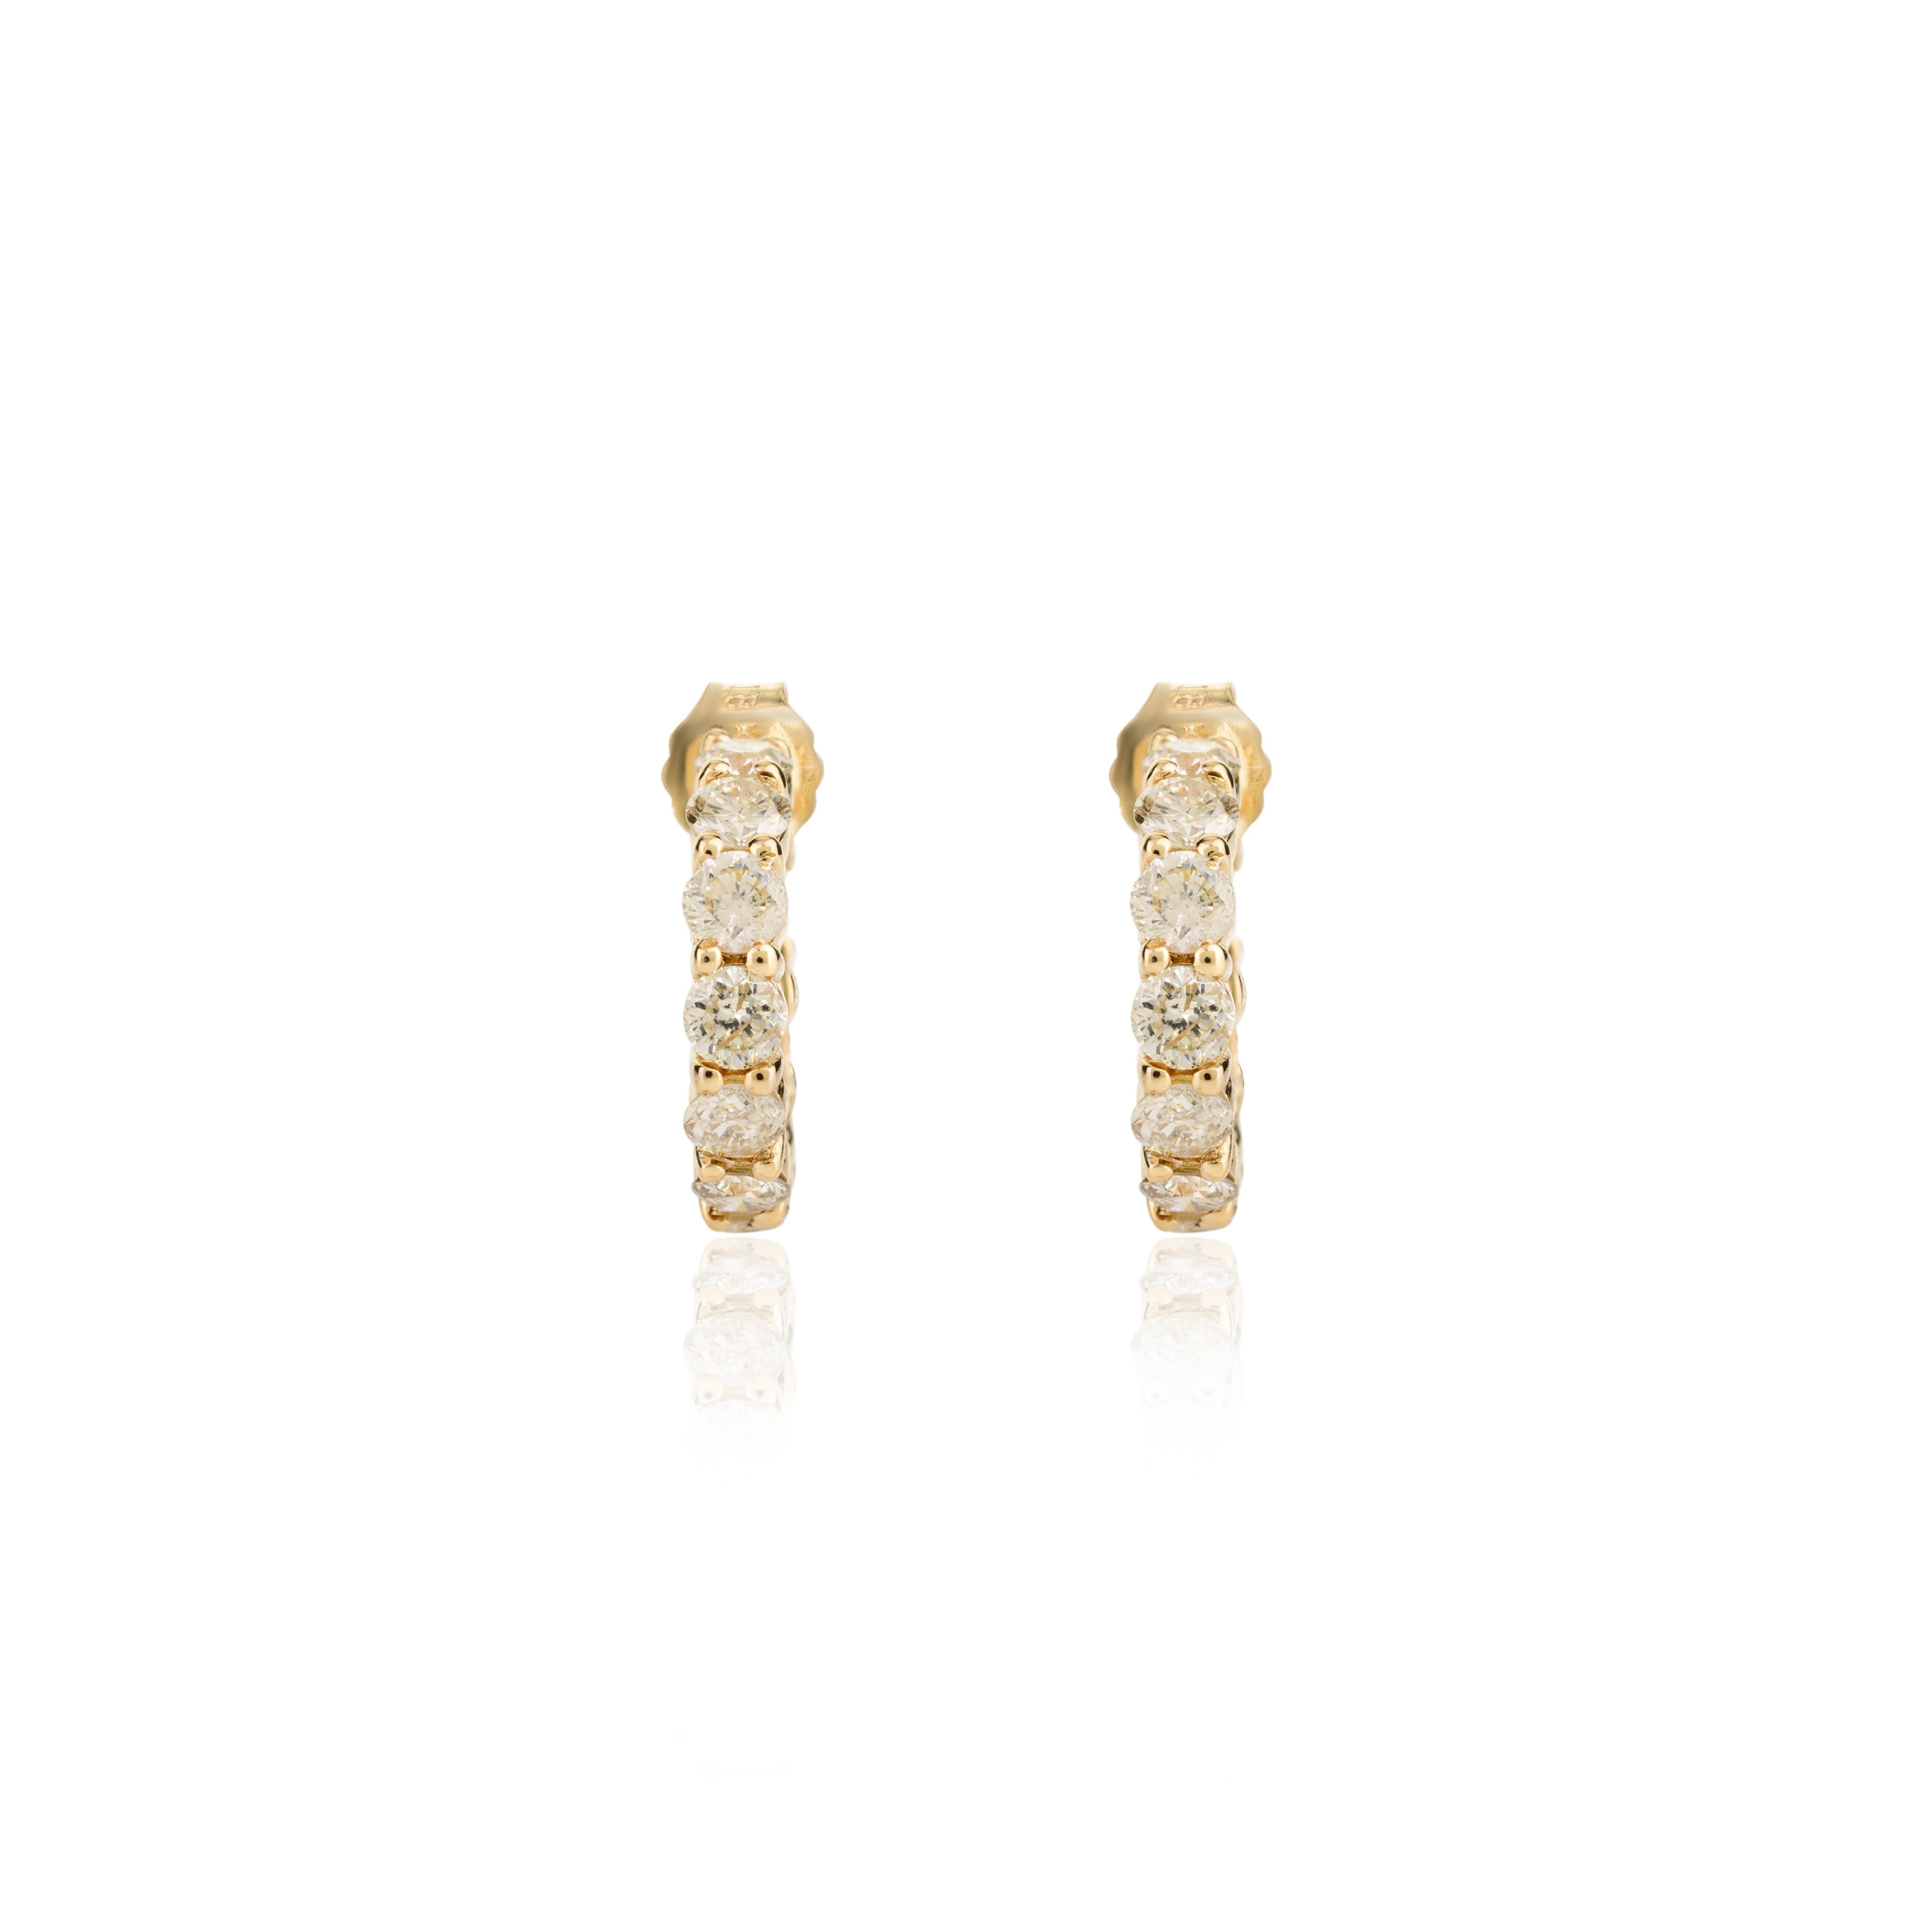 Modern Dainty Everyday Diamond Hoop Earrings in 18k Yellow Gold Perfect Gift for Her For Sale